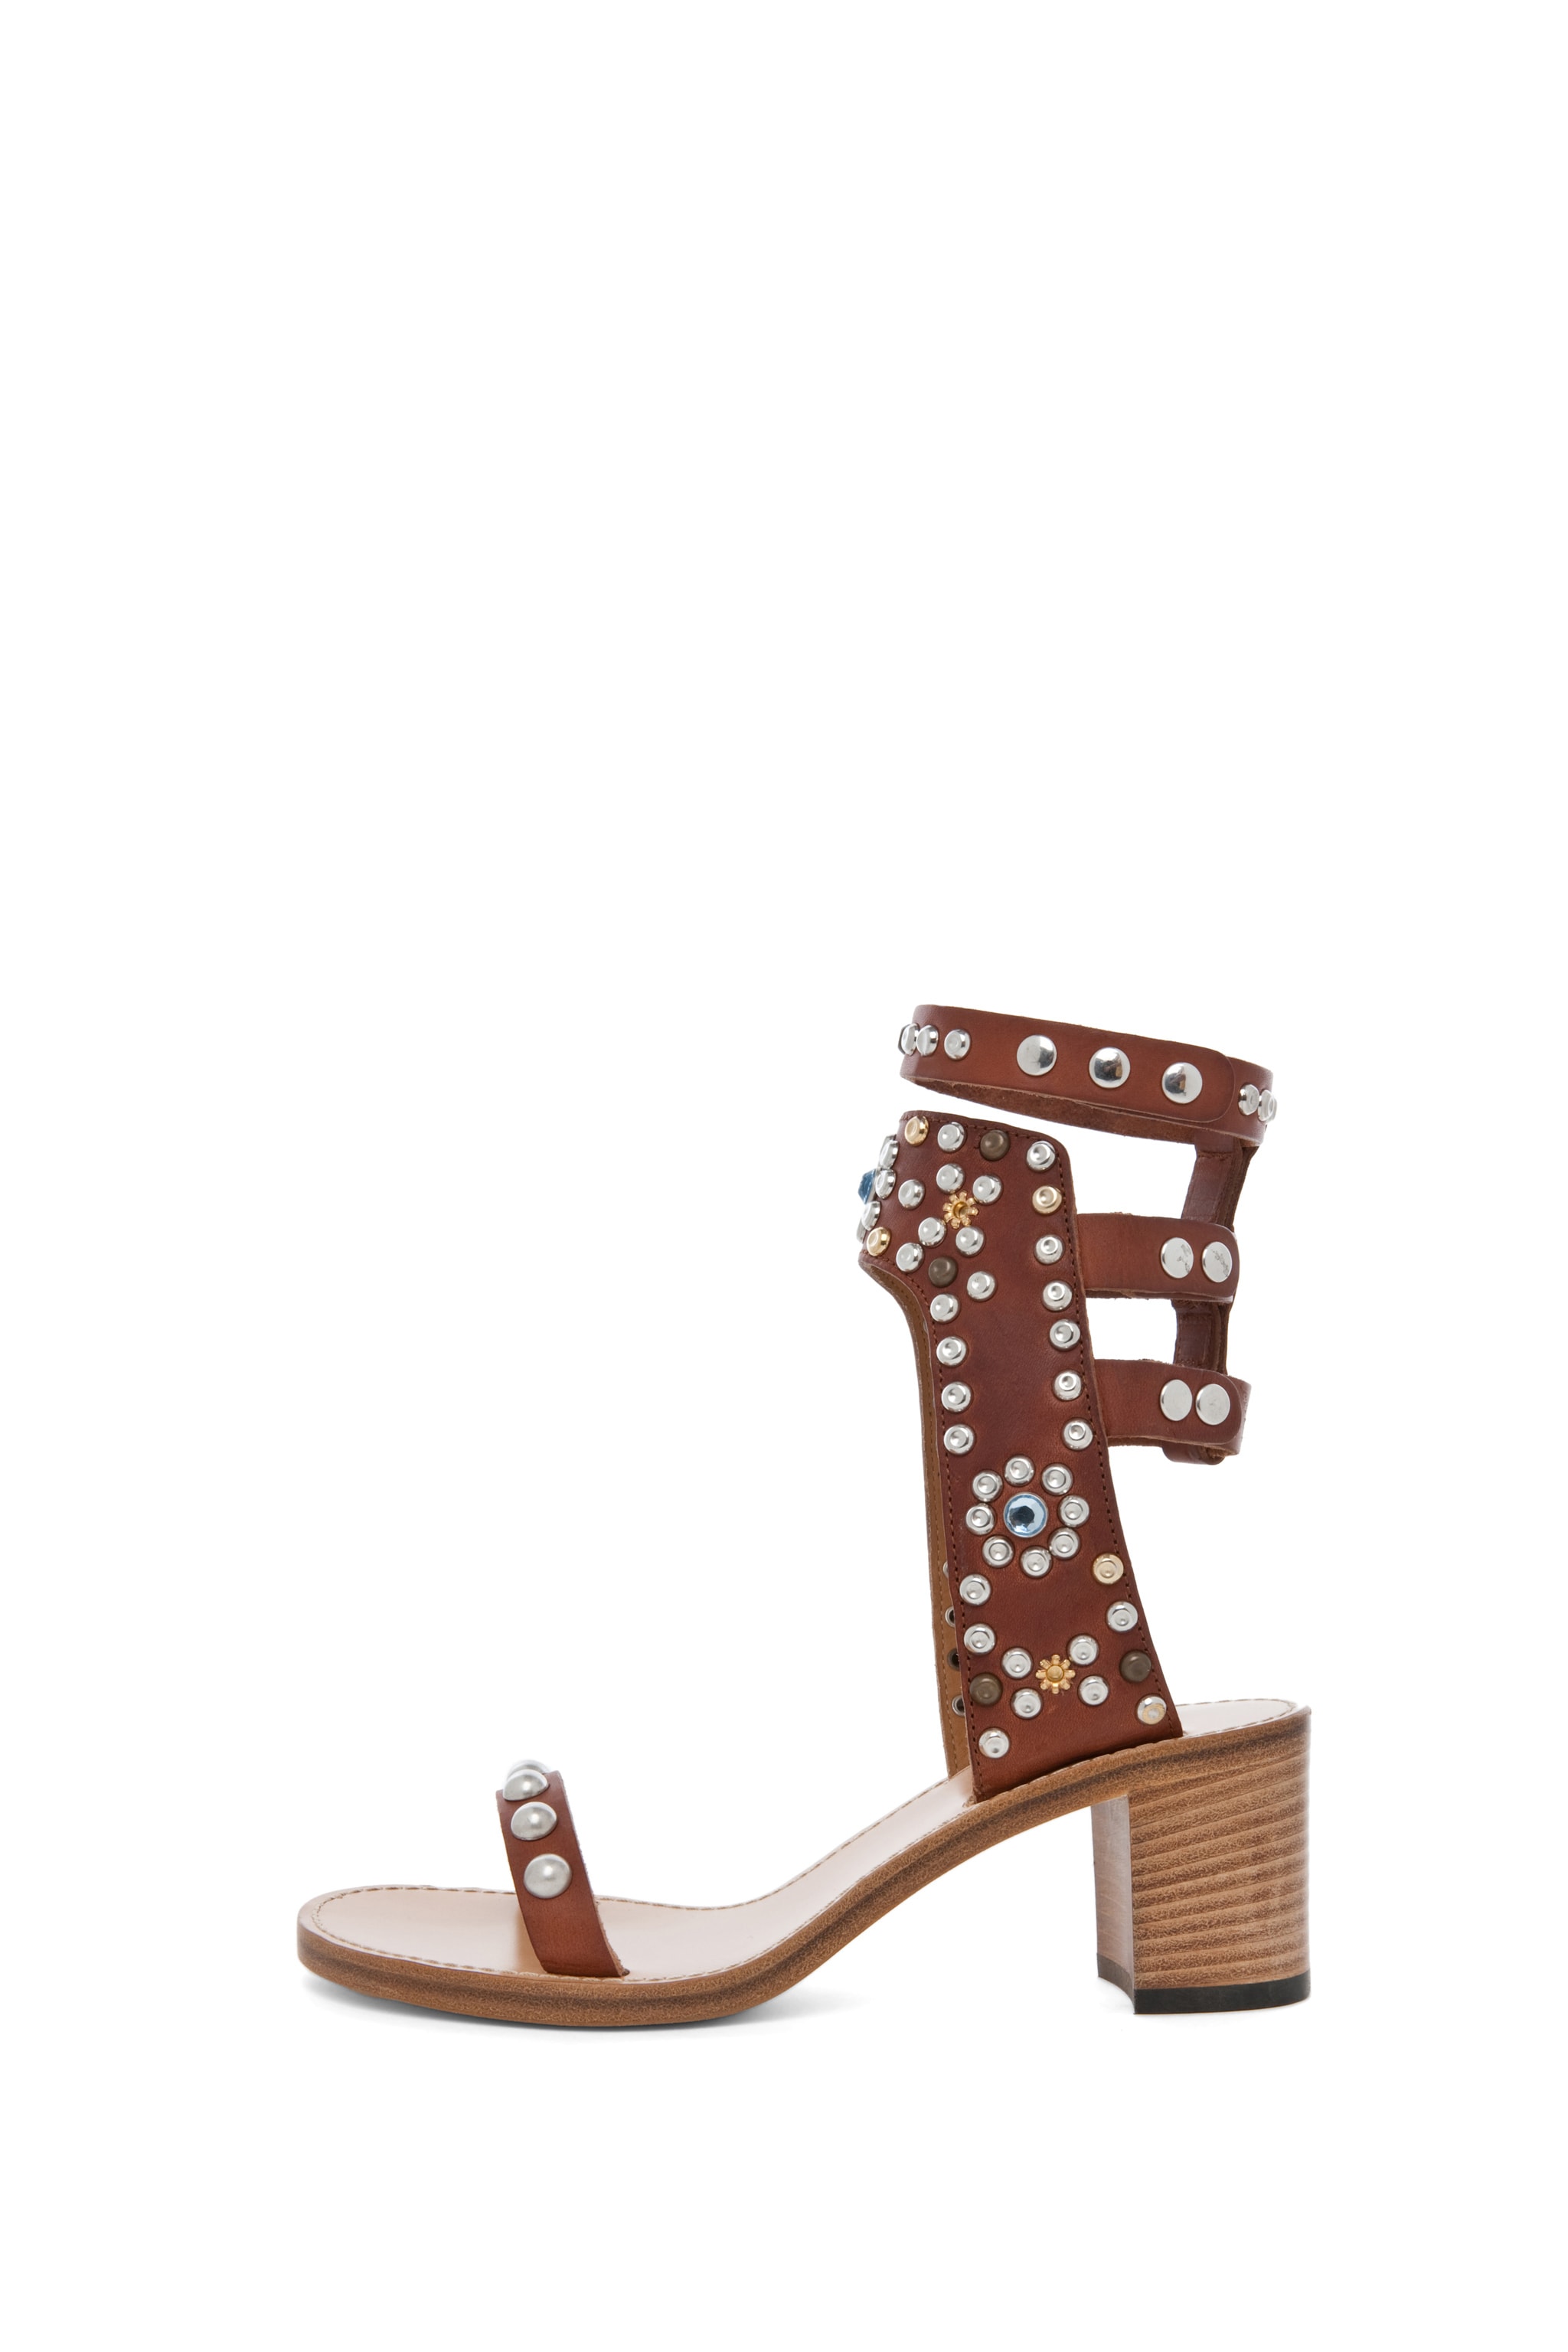 Image 1 of Isabel Marant Caroll Strassed and Studded Sandal in Cognac